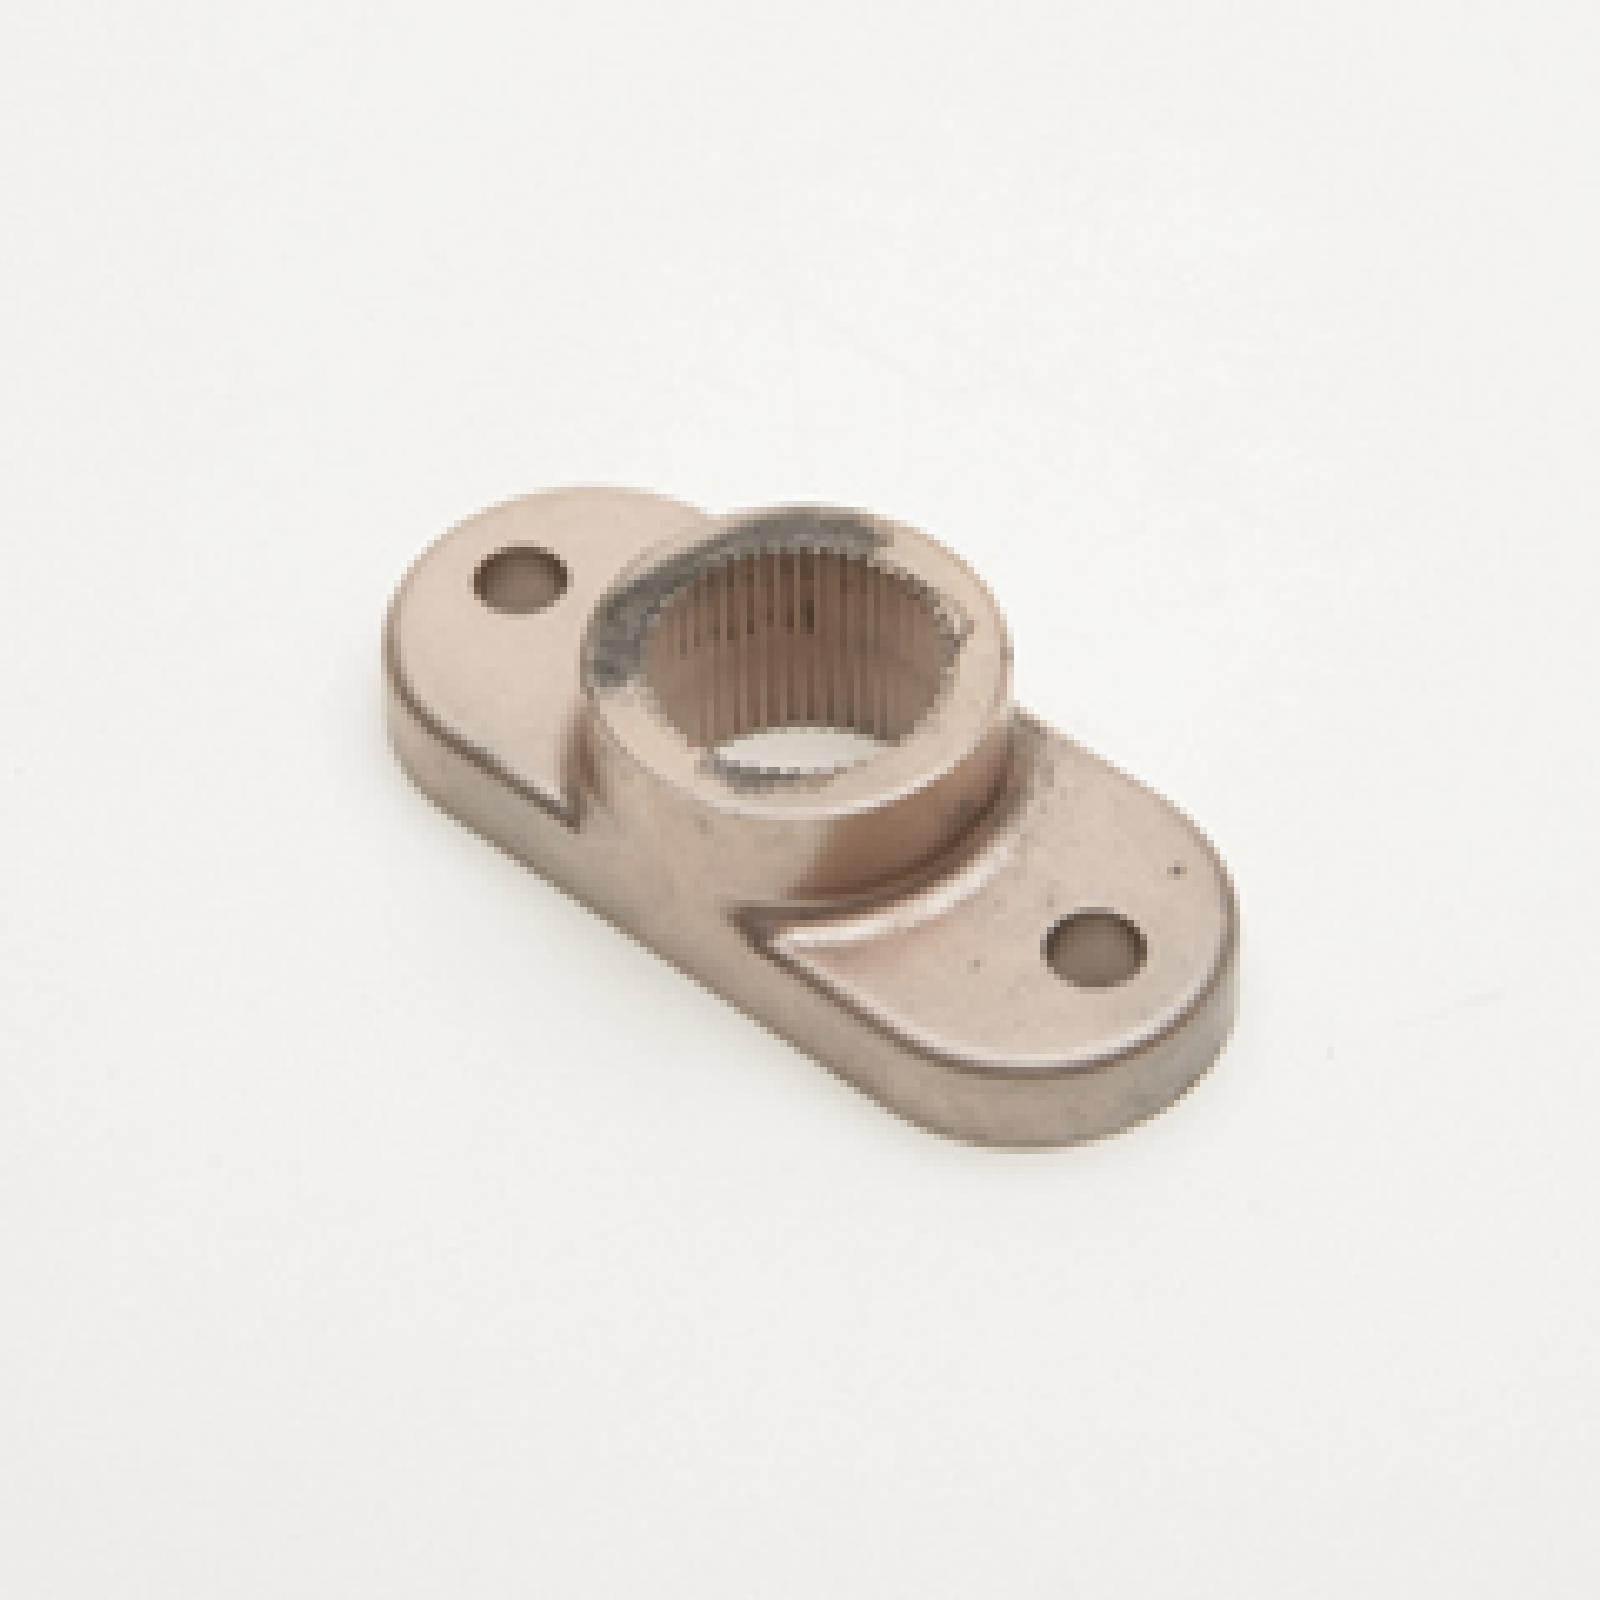 SPACER BEARING part# 748-0390 by MTD